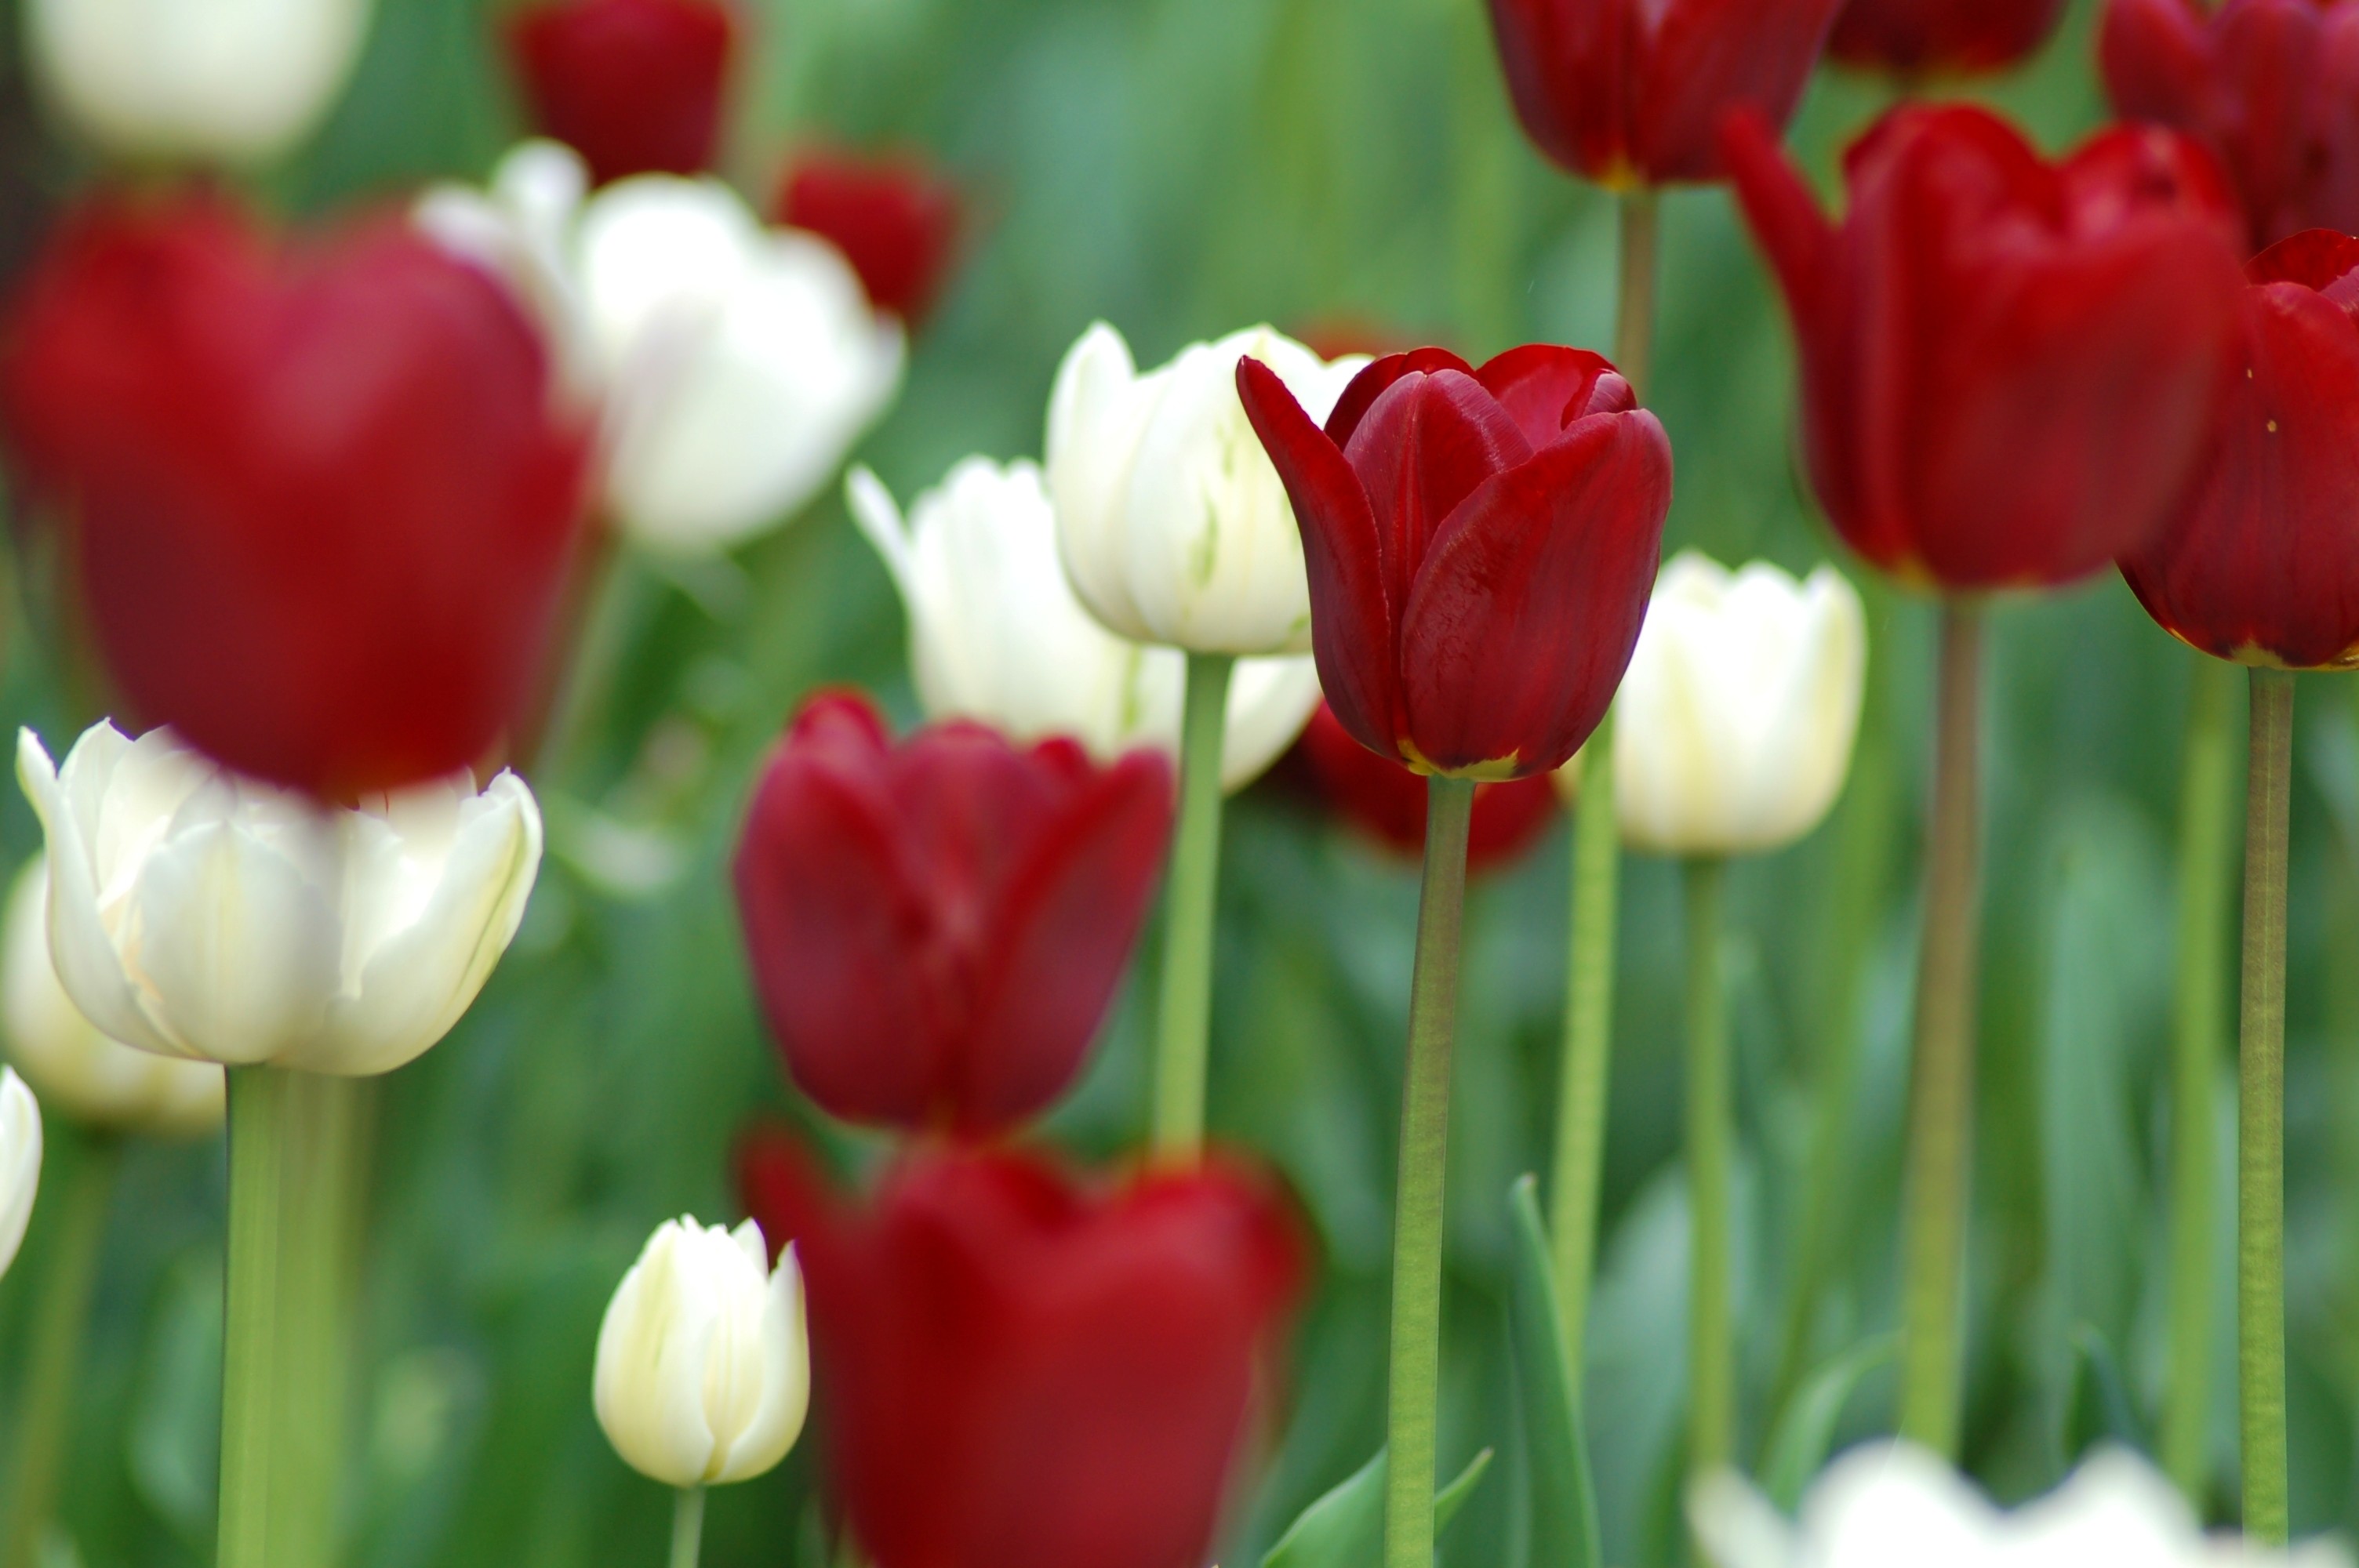 Red and white tulips, pictured here, will bloom in Fernie's EcoGarden this spring.